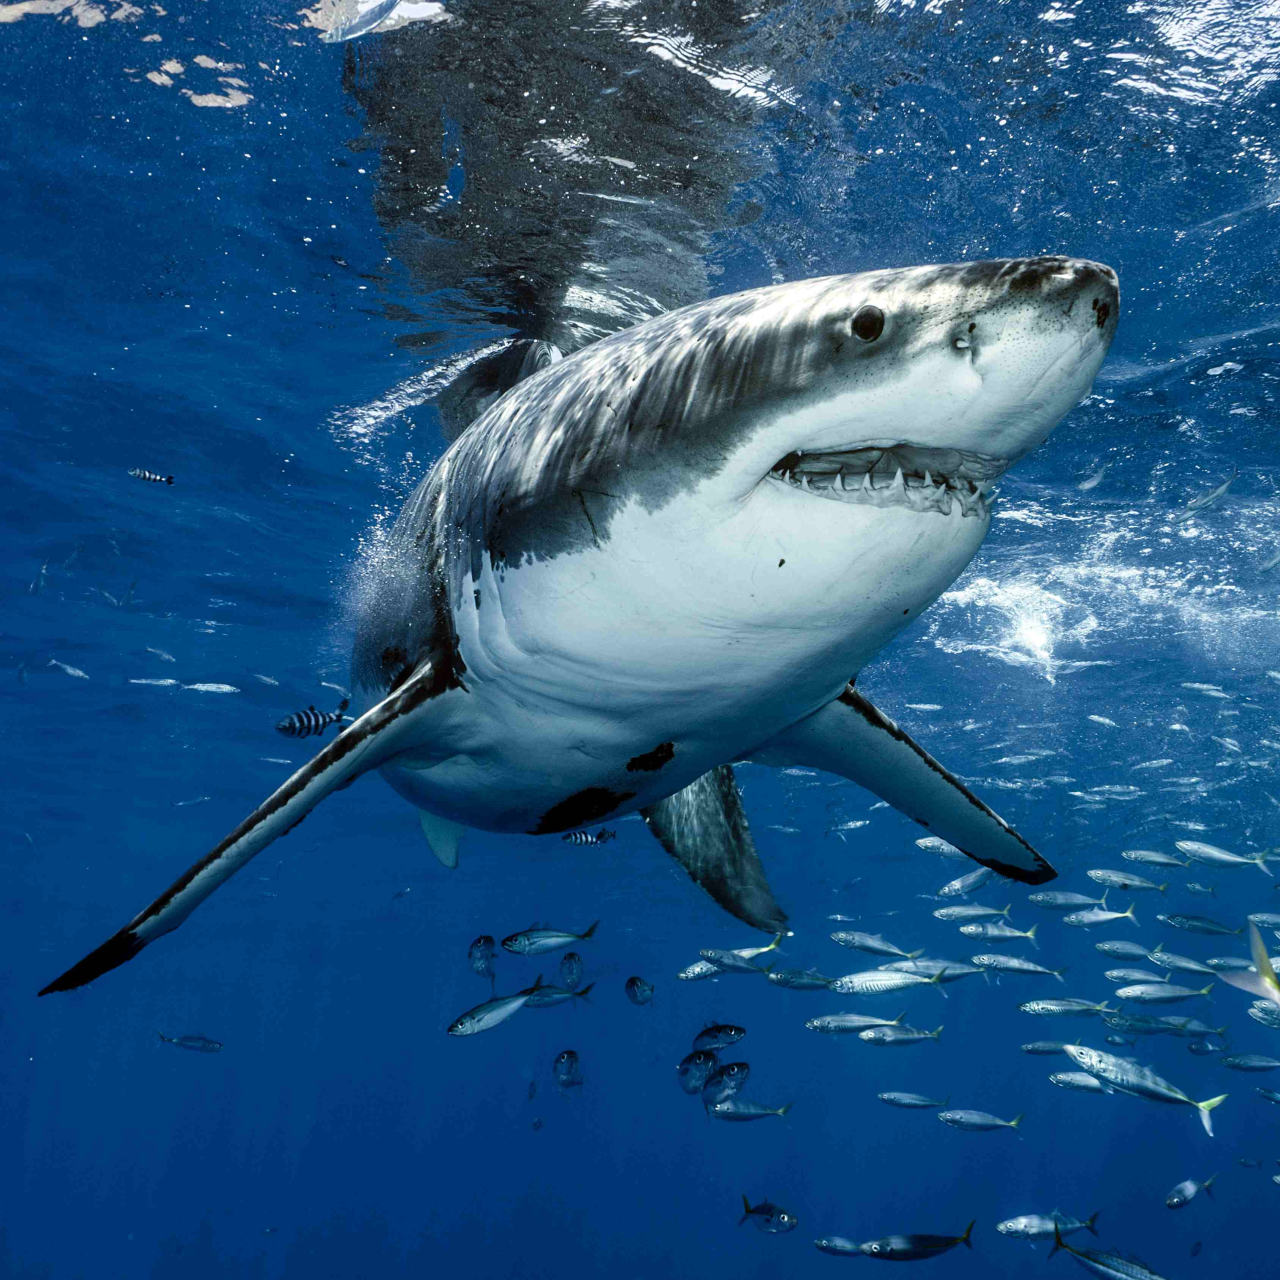 Great white sharks eat more bottomdwelling fish than